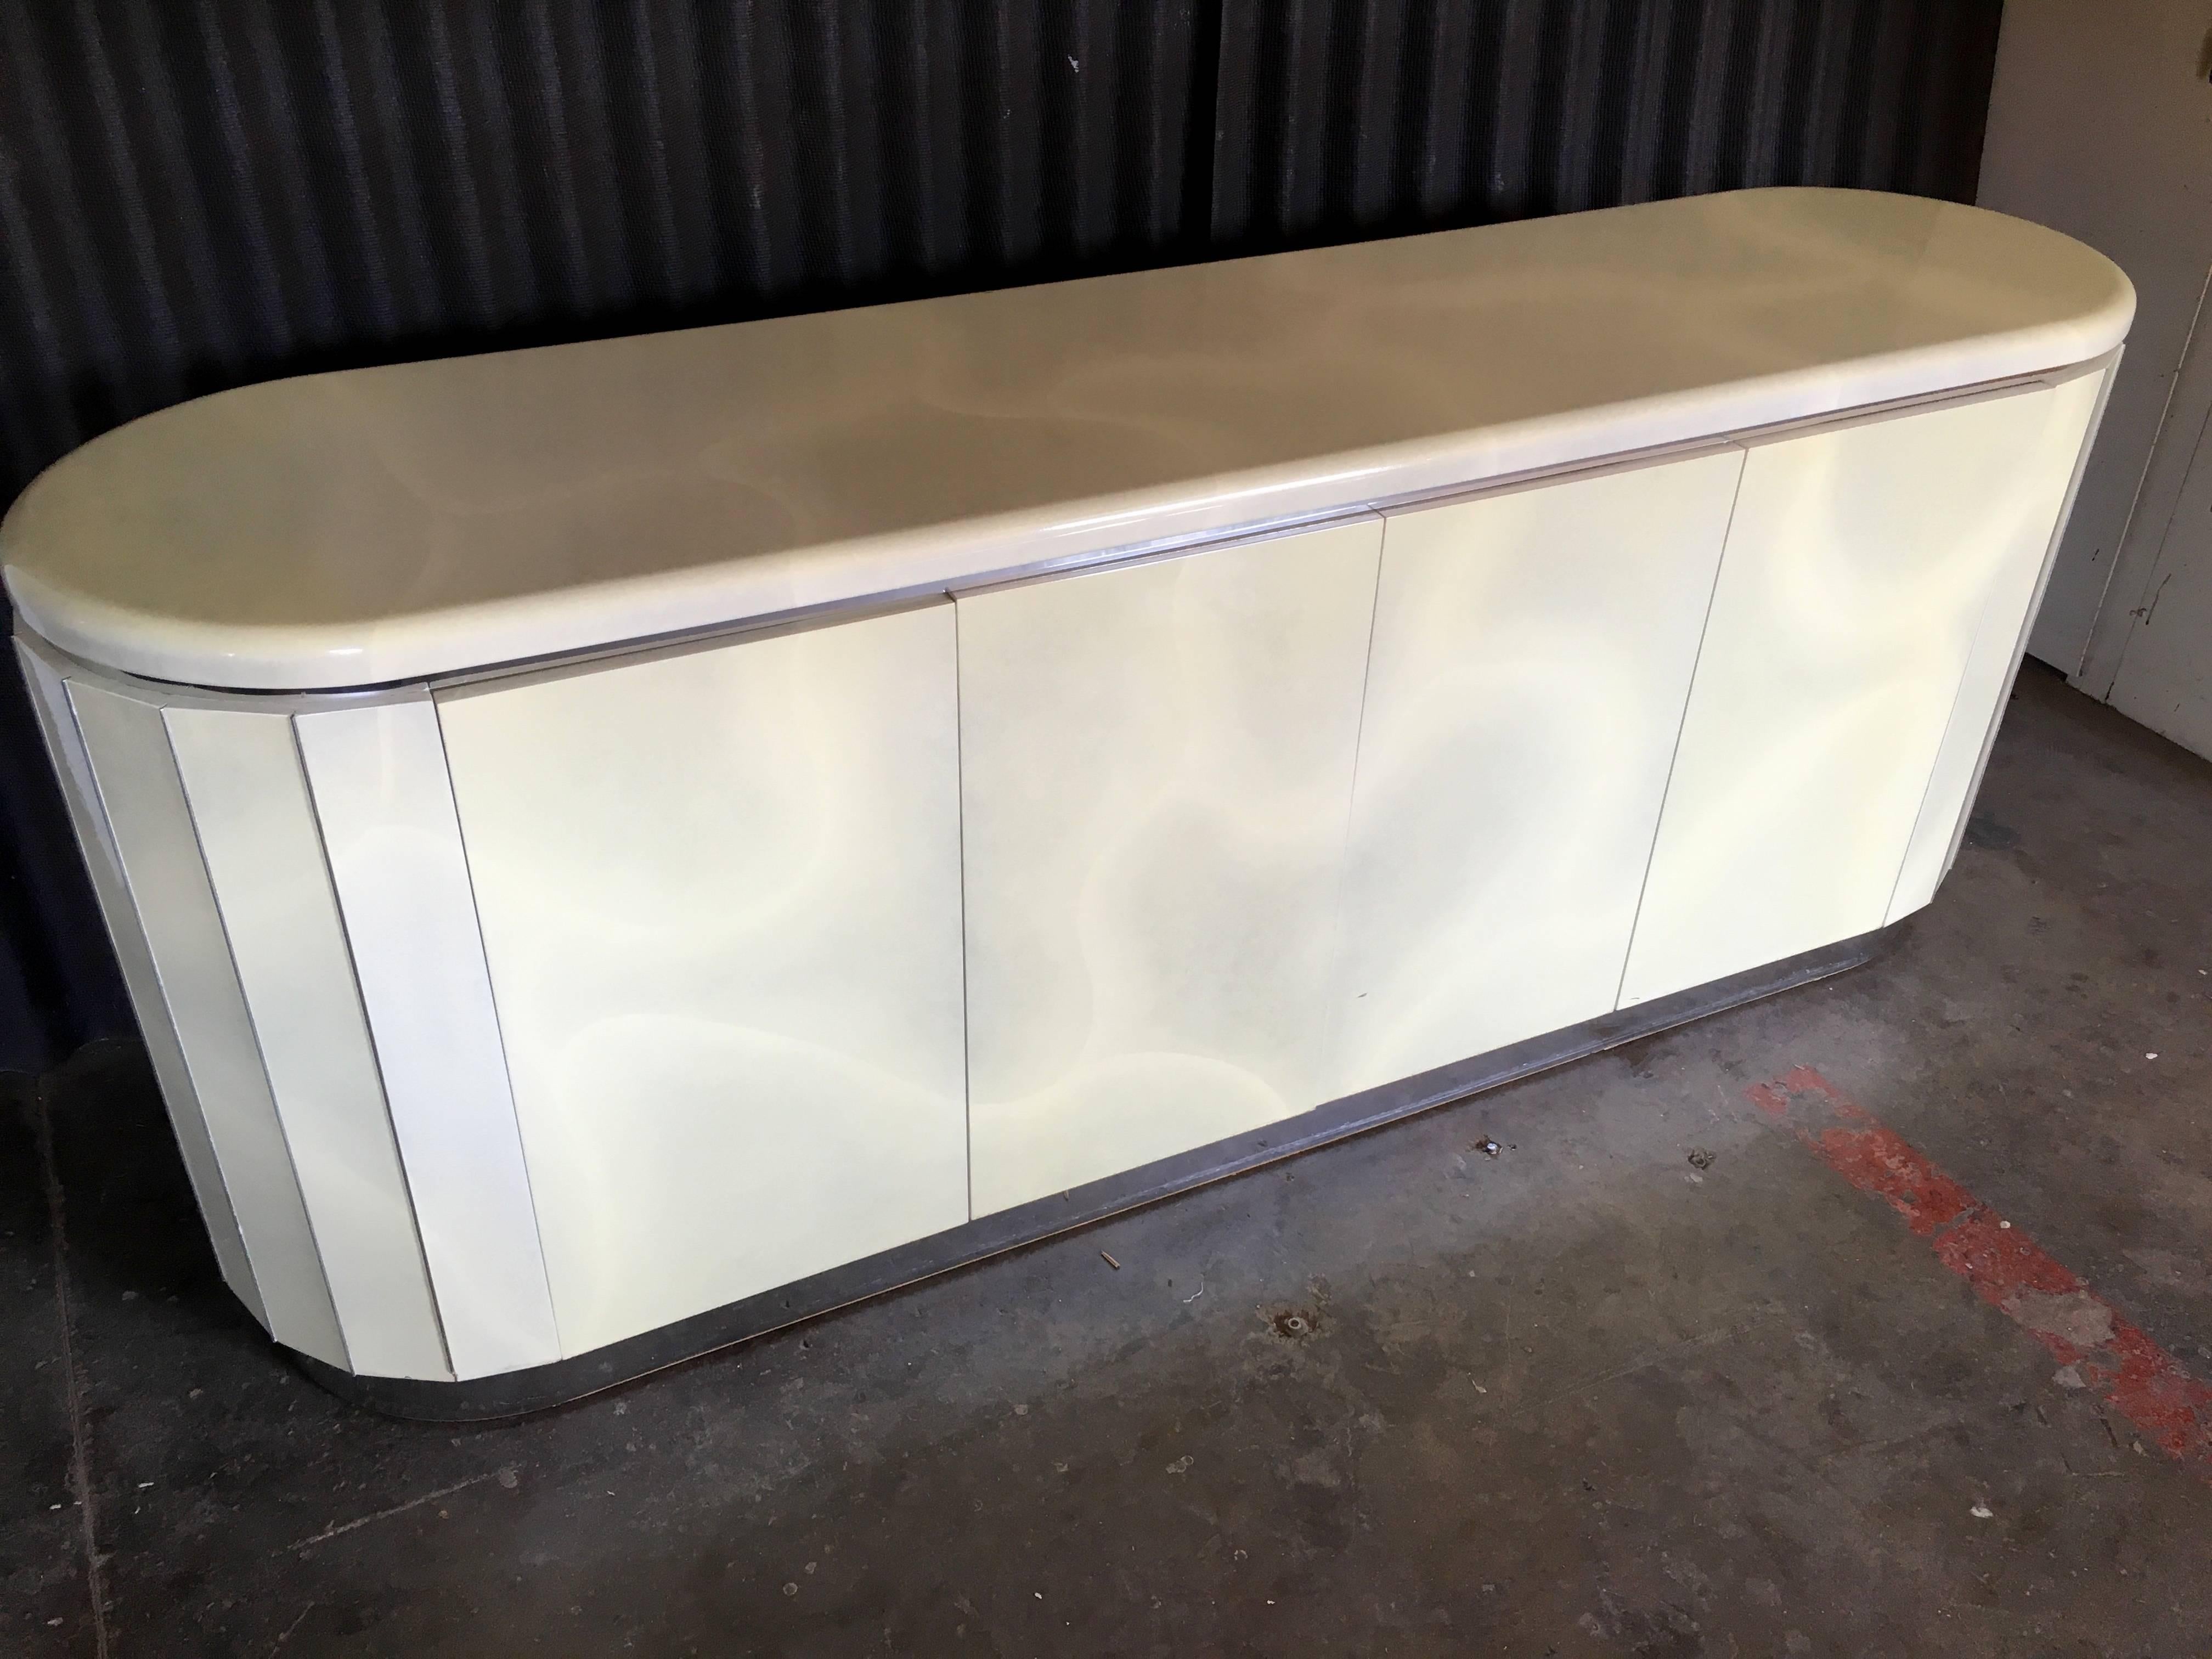 Faux Goat Skin Credenza Buffet 
Stunning piece in great condition!
As the light changes, the pattern becomes even clearer
80Wide x 19.75Deep x 31.75High